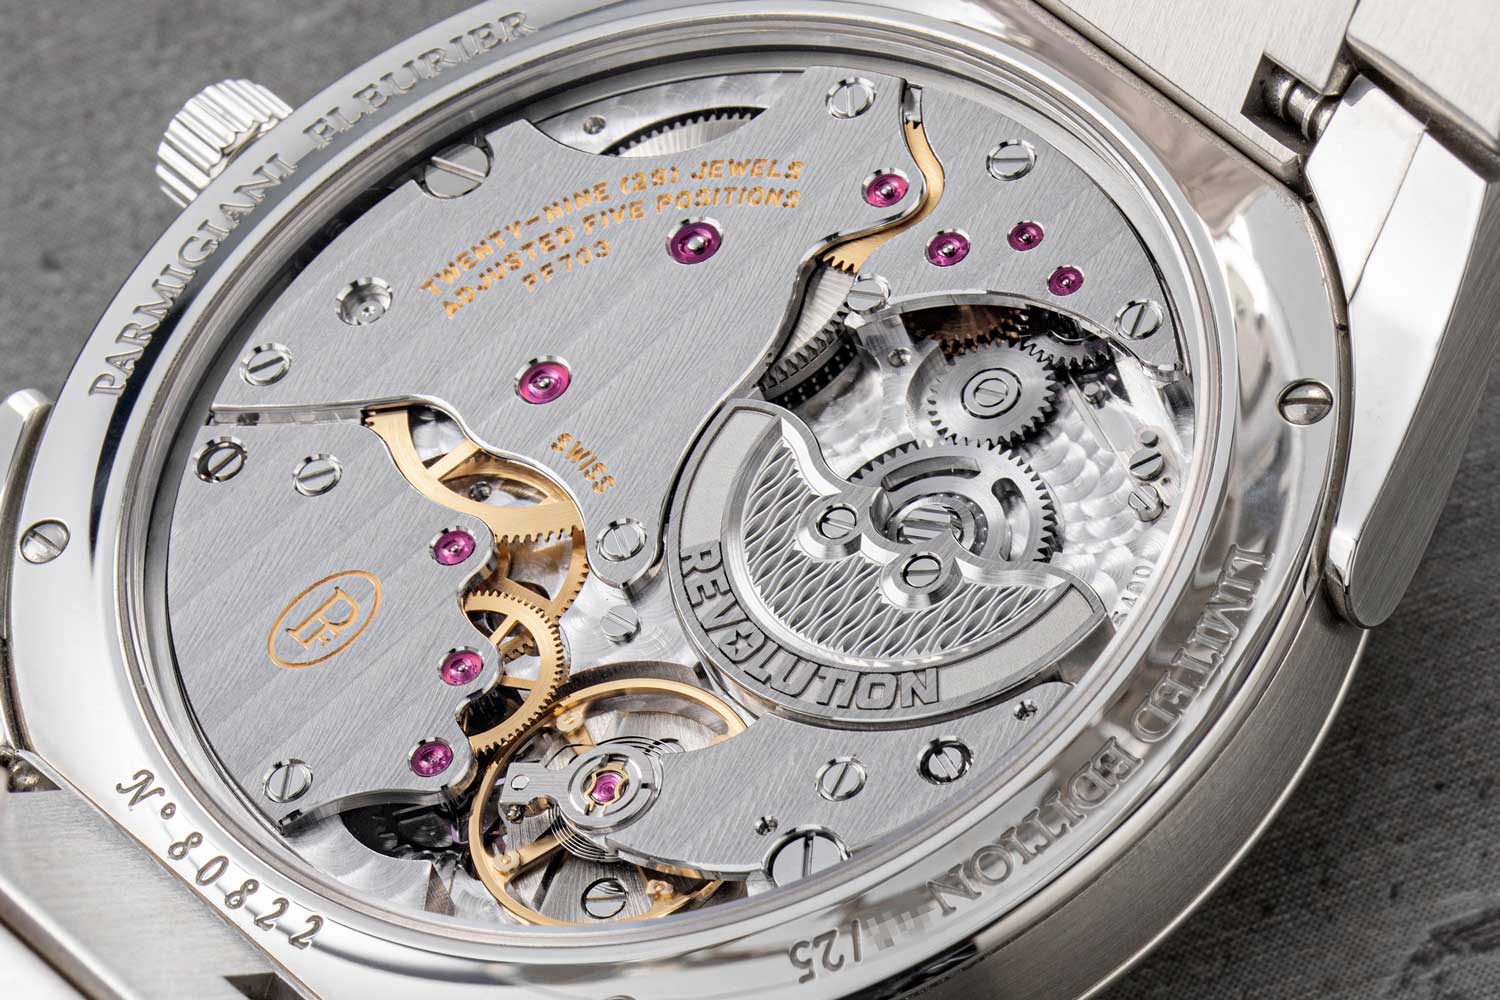 From top: The Parmigiani x Revolution and The Rake Tonda PF Micro-Rotor is the perfect timepiece in part thanks to its extraordinary ergonomics; The design details that make all the difference; The caseback reveals the micro-rotor with the Revolution logo imprint (Images: Revolution©)